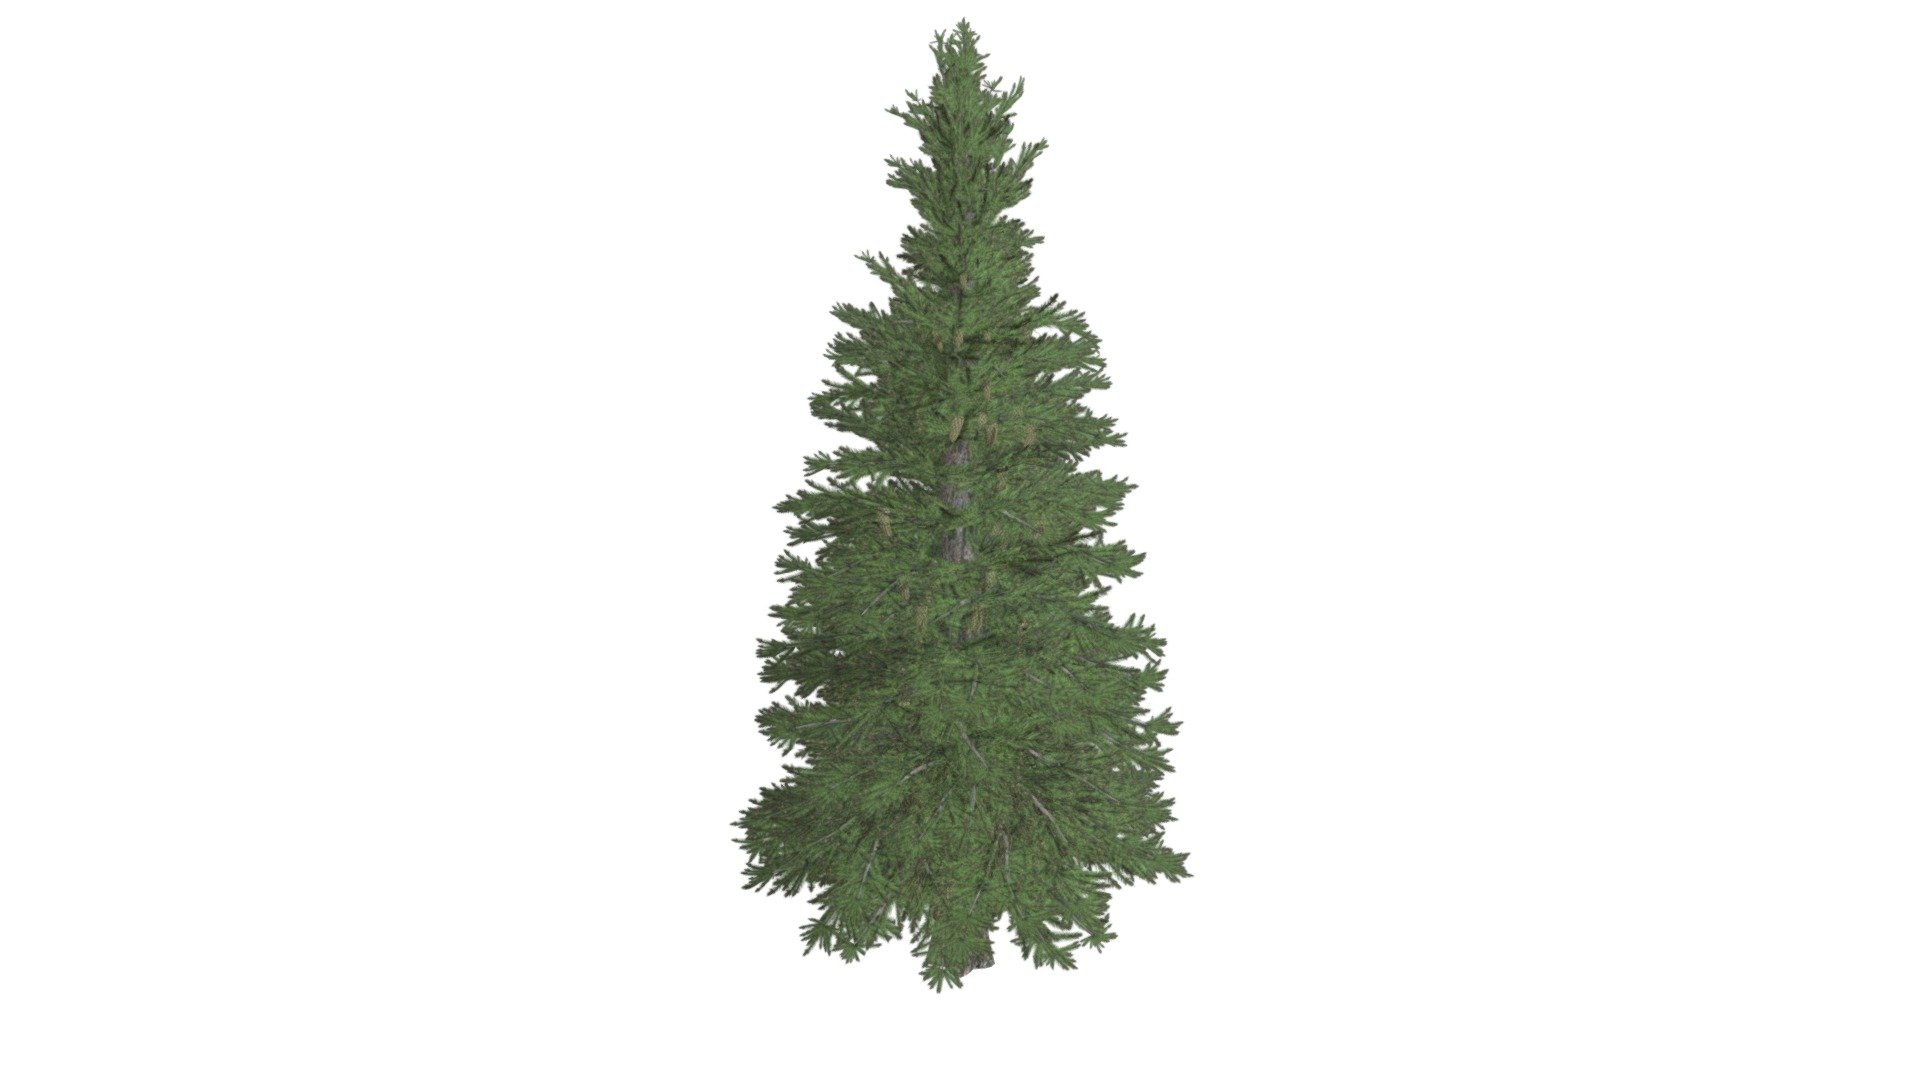 This 3D model of the Norway Spruce Tree is a highly detailed and photorealistic option suitable for architectural, landscaping, and video game projects. The model is designed with carefully crafted textures that mimic the natural beauty of a real Norway Spruce Tree. Its versatility allows it to bring a touch of realism to any project, whether it's a small architectural rendering or a large-scale landscape design. Additionally, the model is optimized for performance and features efficient UV mapping. This photorealistic 3D model is the perfect solution for architects, landscapers, and game developers who want to enhance the visual experience of their project with a highly detailed, photorealistic Norway Spruce Tree 3d model